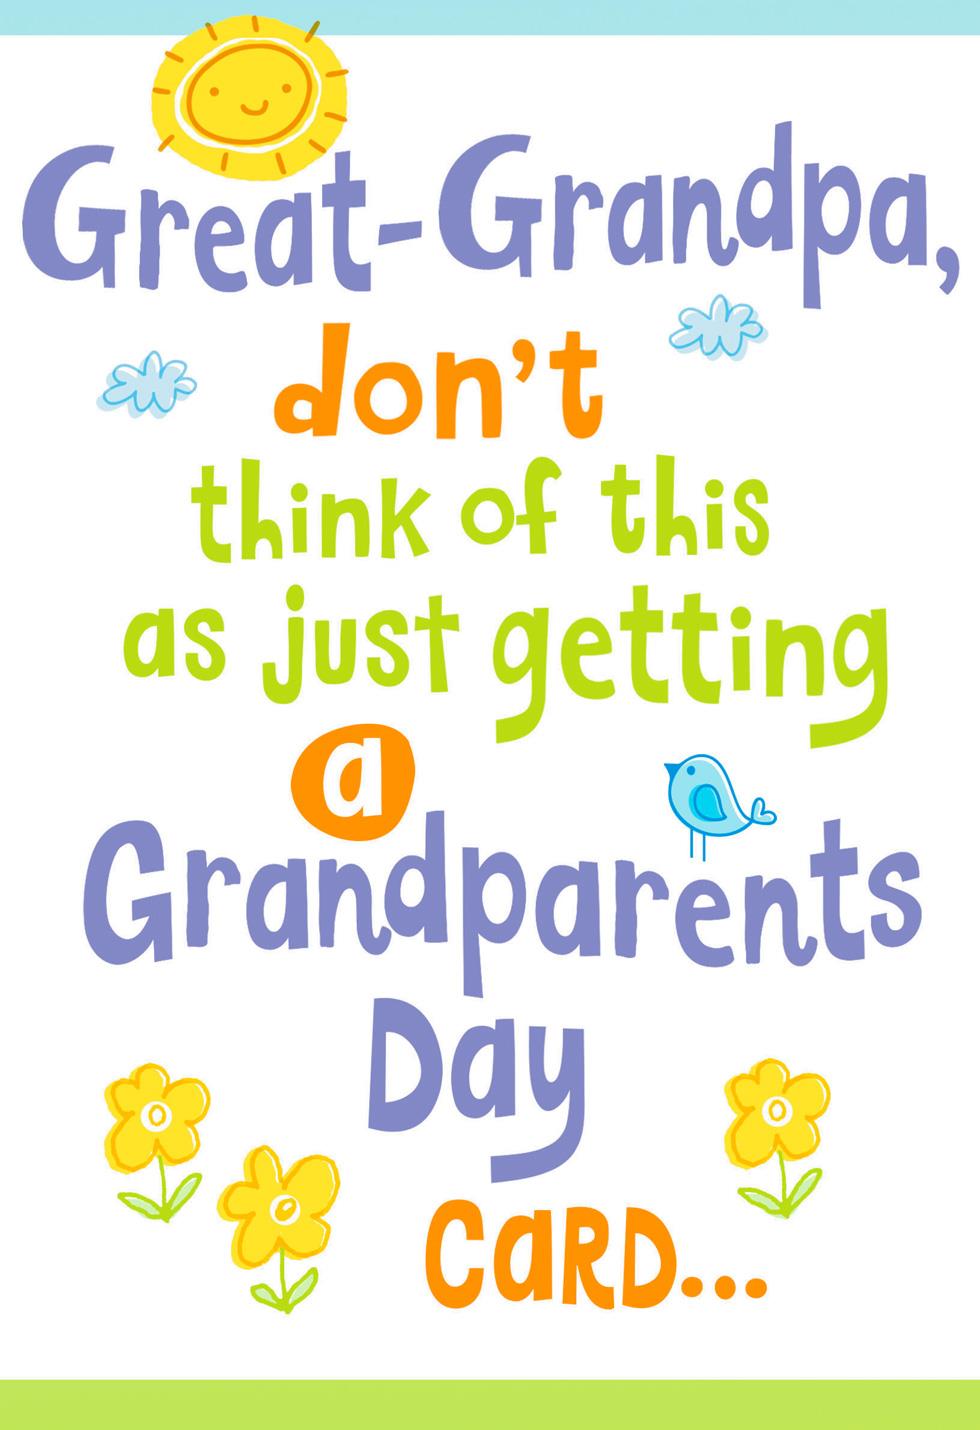 A Big Hug for You Grandparents Day Card for Great-Grandpa ...